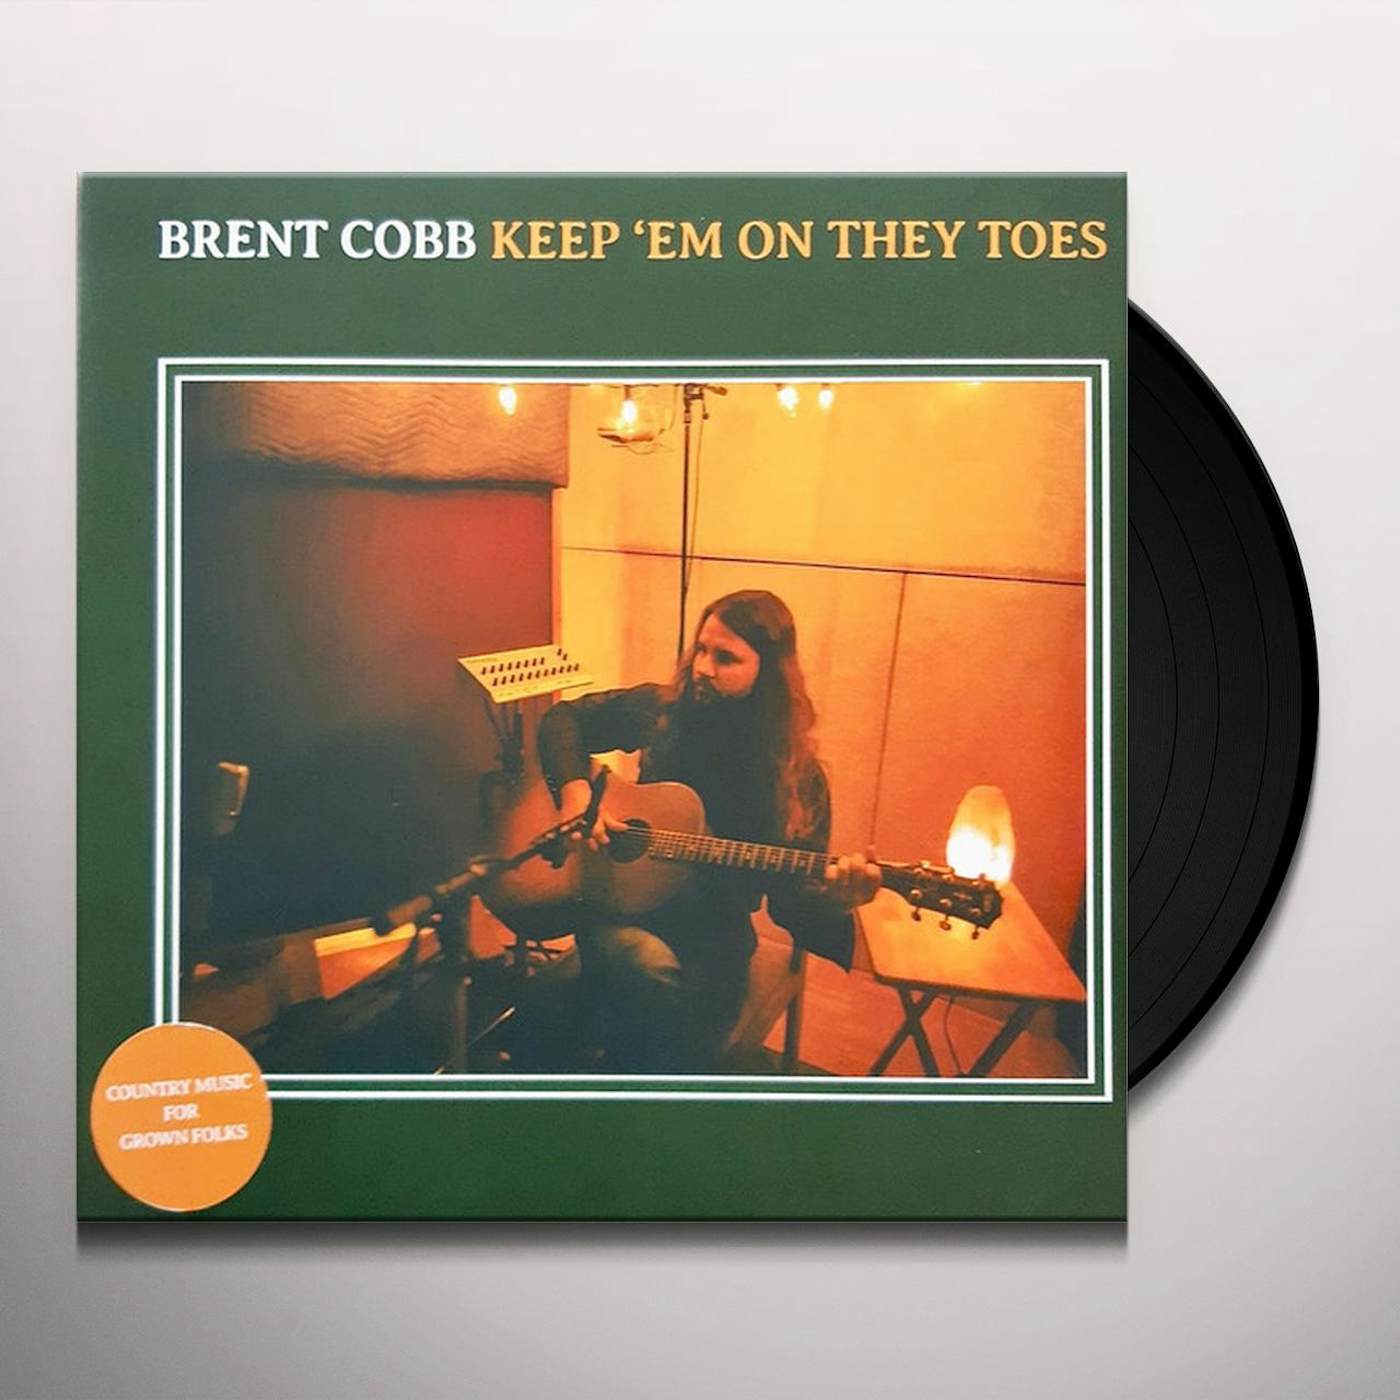 Brent Cobb Keep 'Em on They Toes Vinyl Record